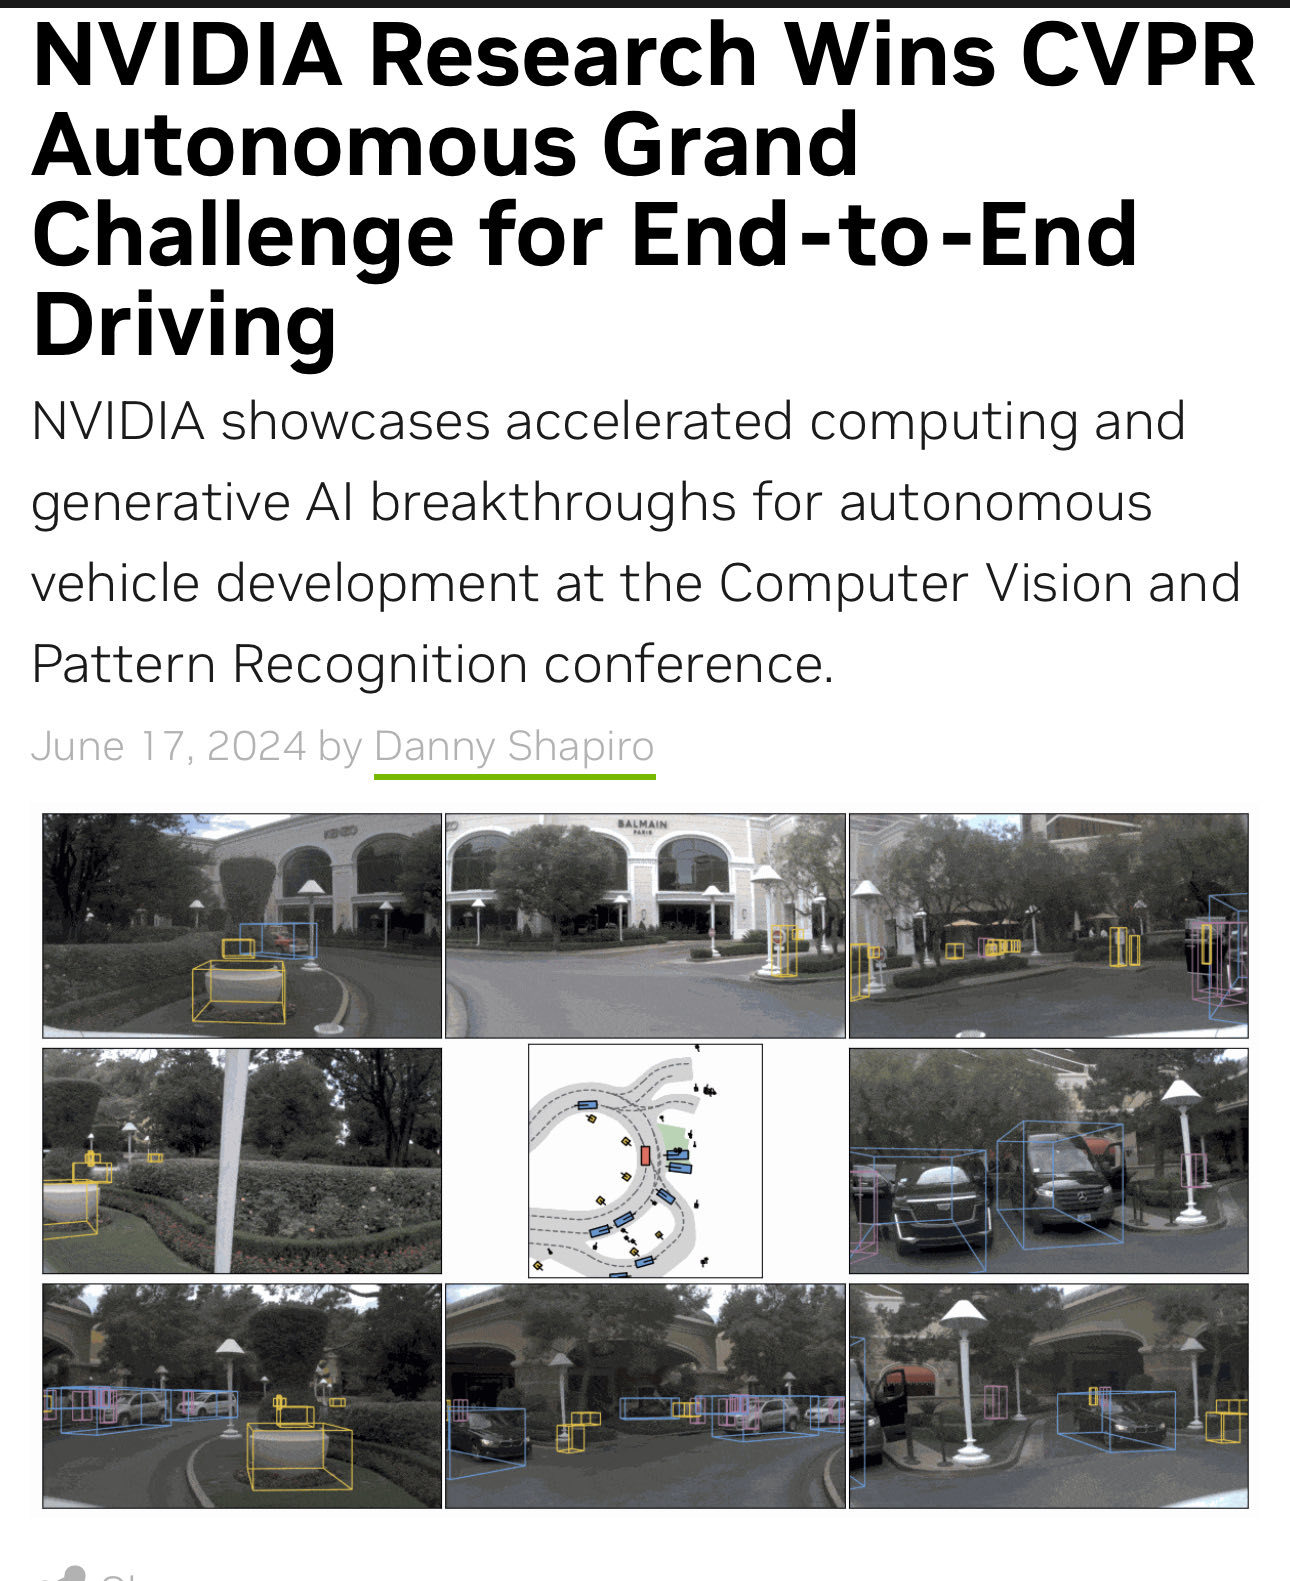 $NVIDIA (NVDA.US)$ [Share Link: NVIDIA Research Wins CVPR Autonomous Grand Challenge for End-to-End Driving]